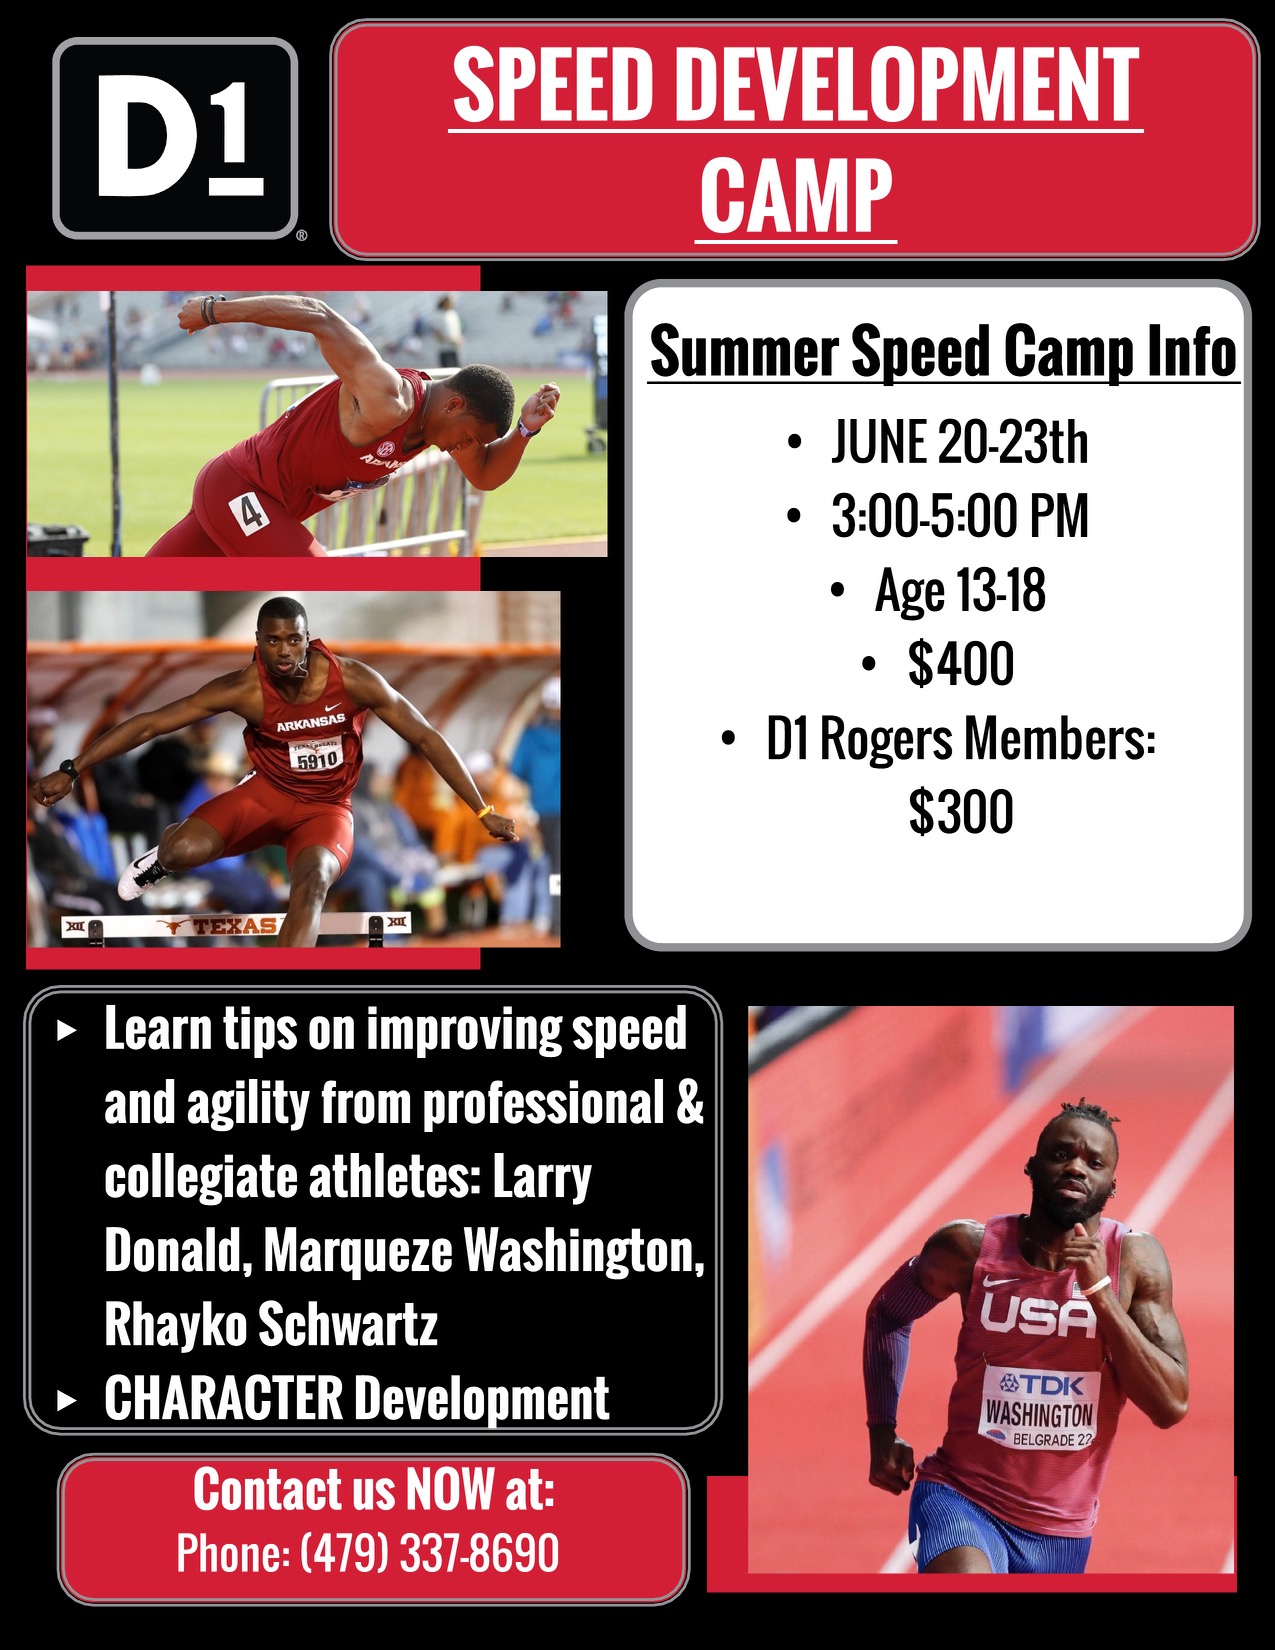 Speed Development Camp at D1 Rogers